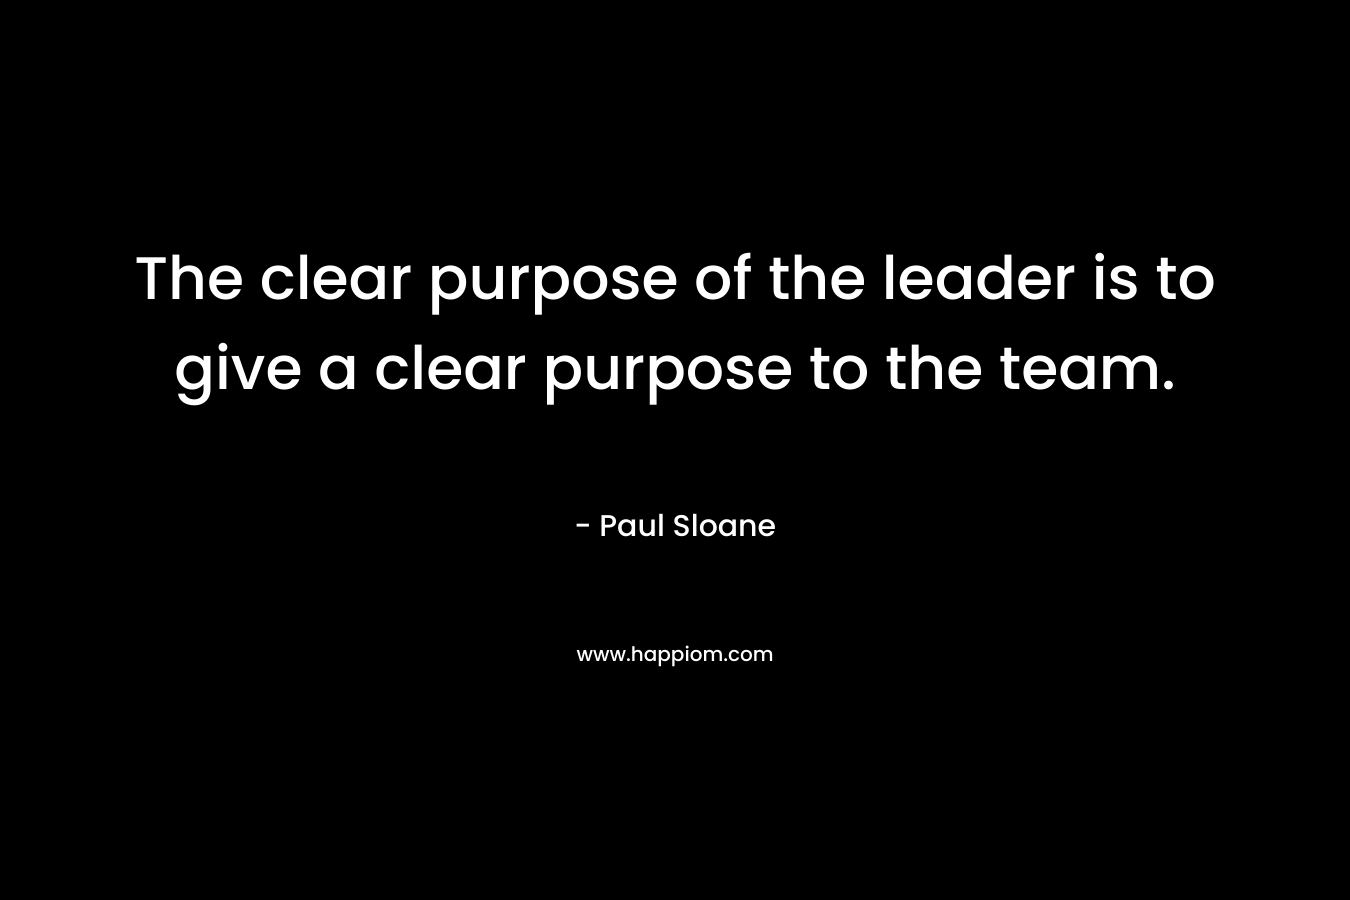 The clear purpose of the leader is to give a clear purpose to the team. – Paul Sloane